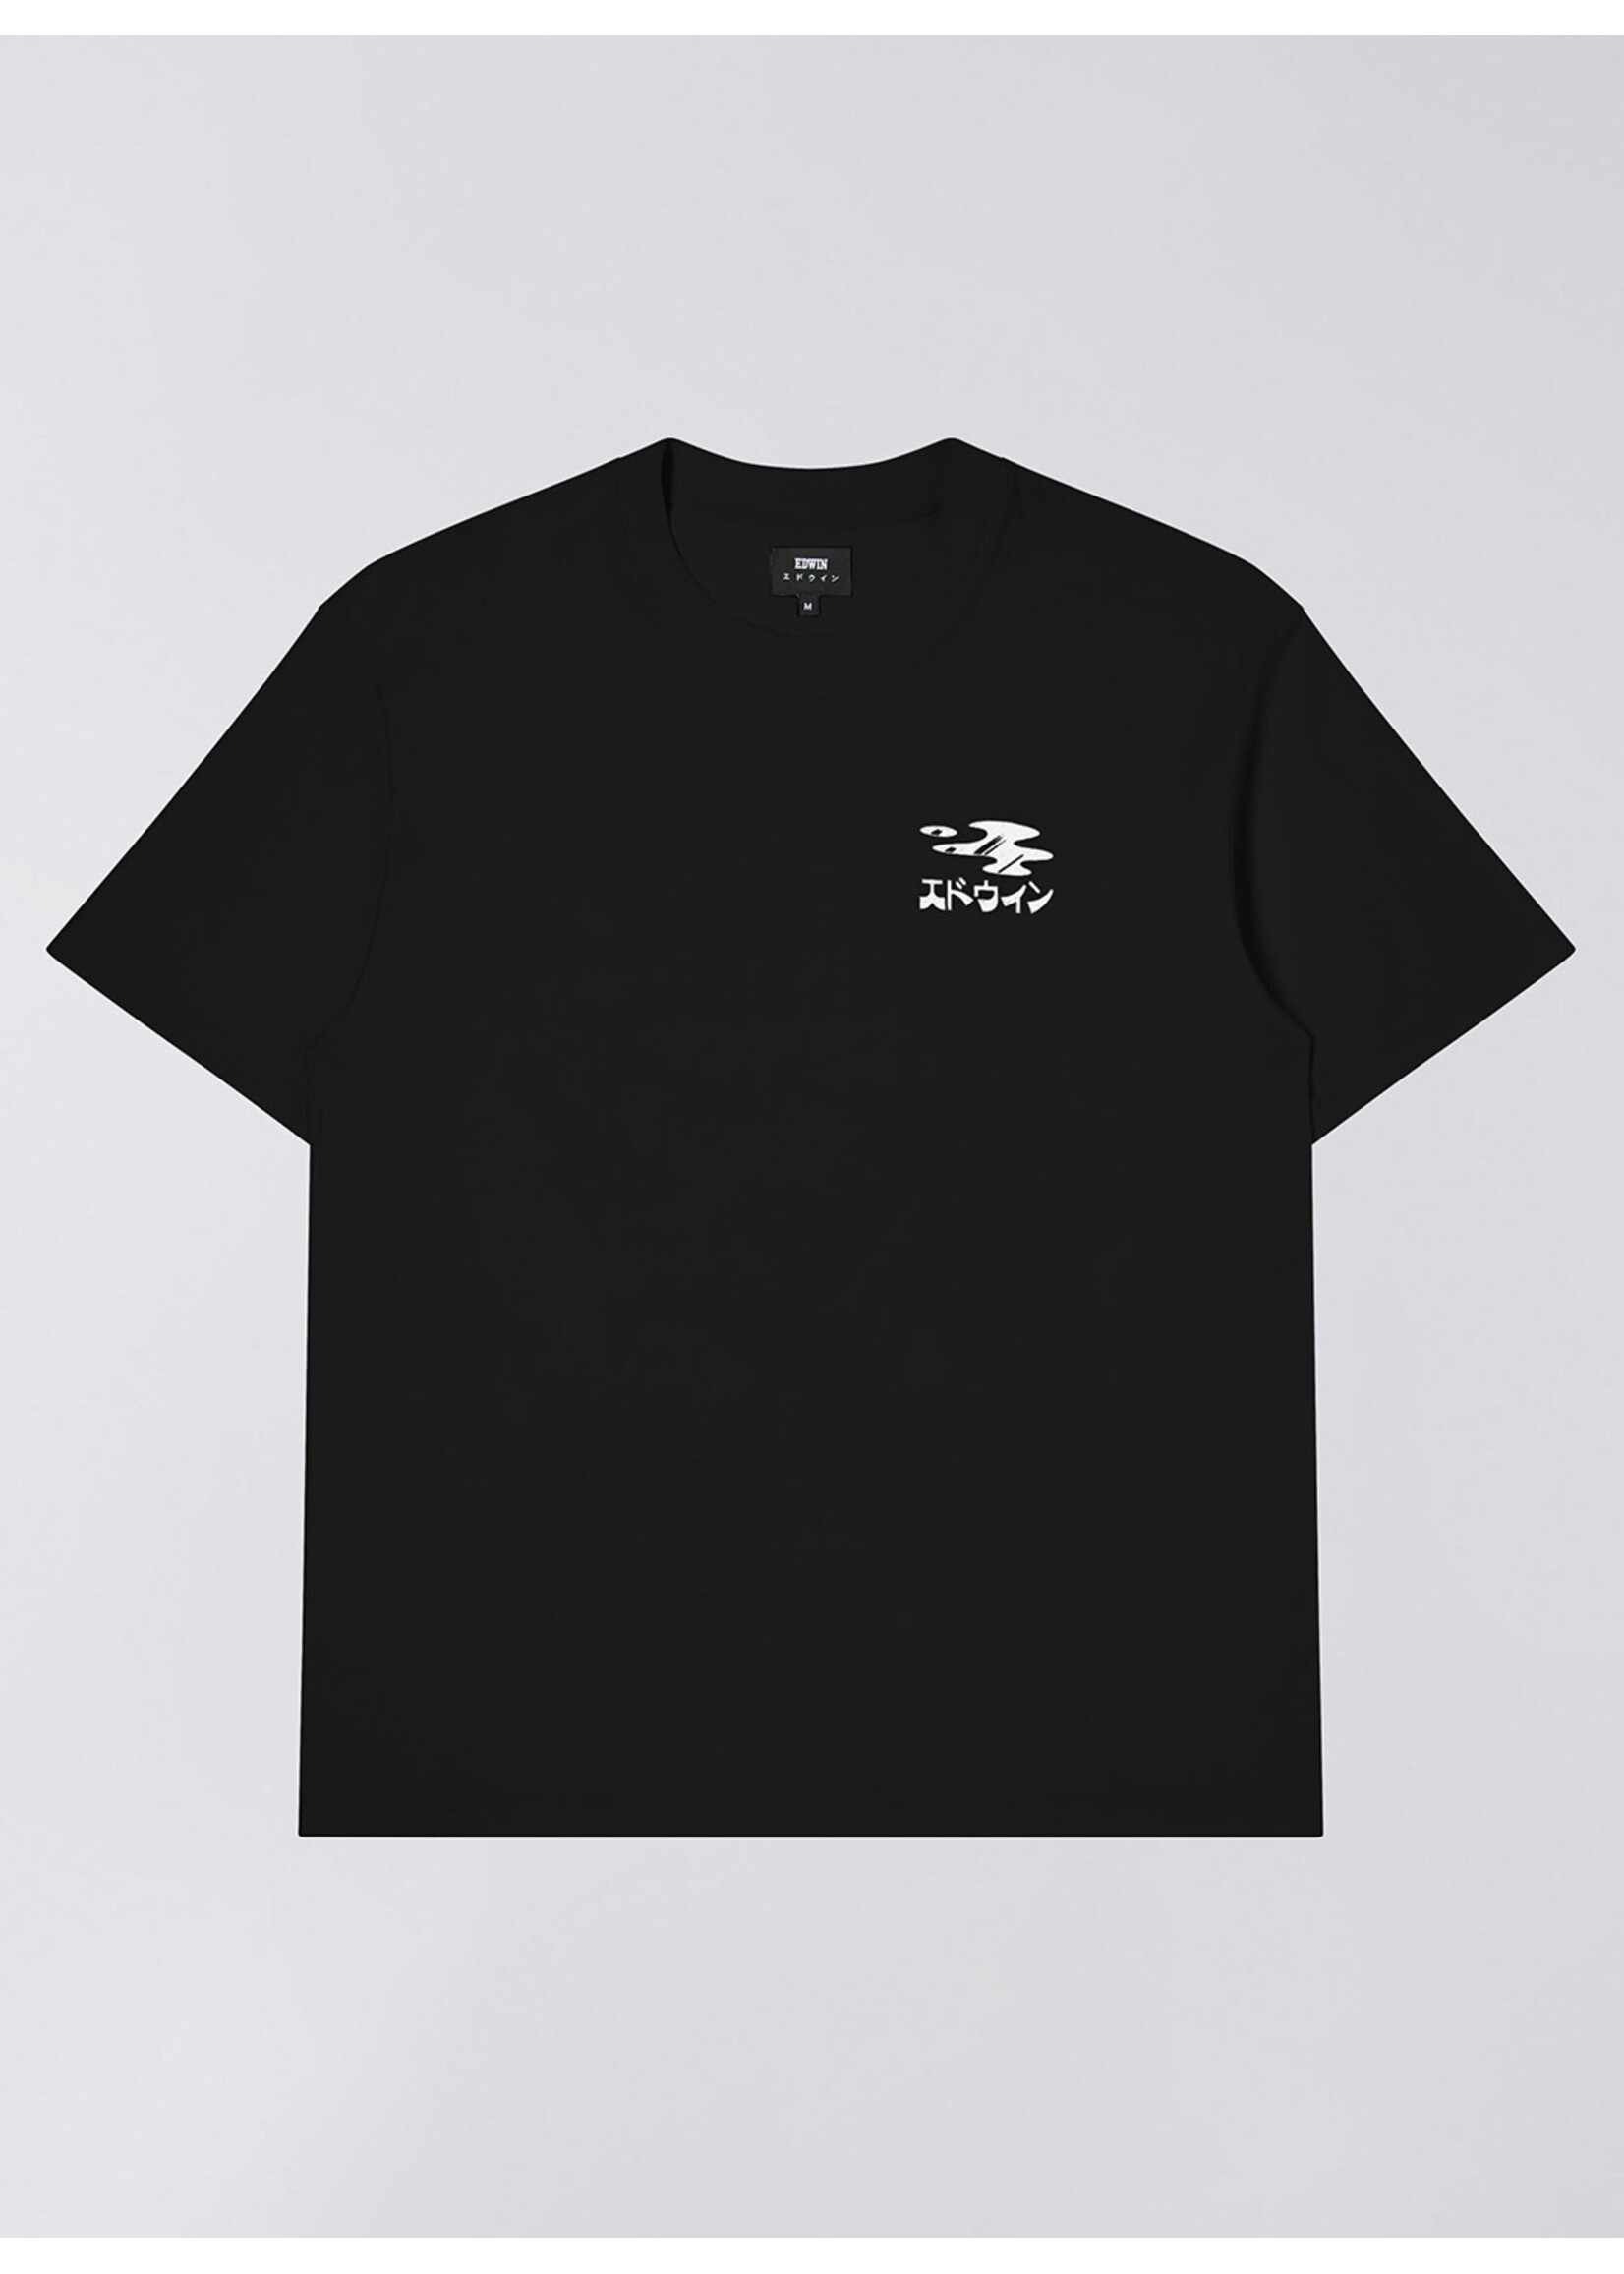 Edwin Stay Hydrated Tee Black Garment Washed